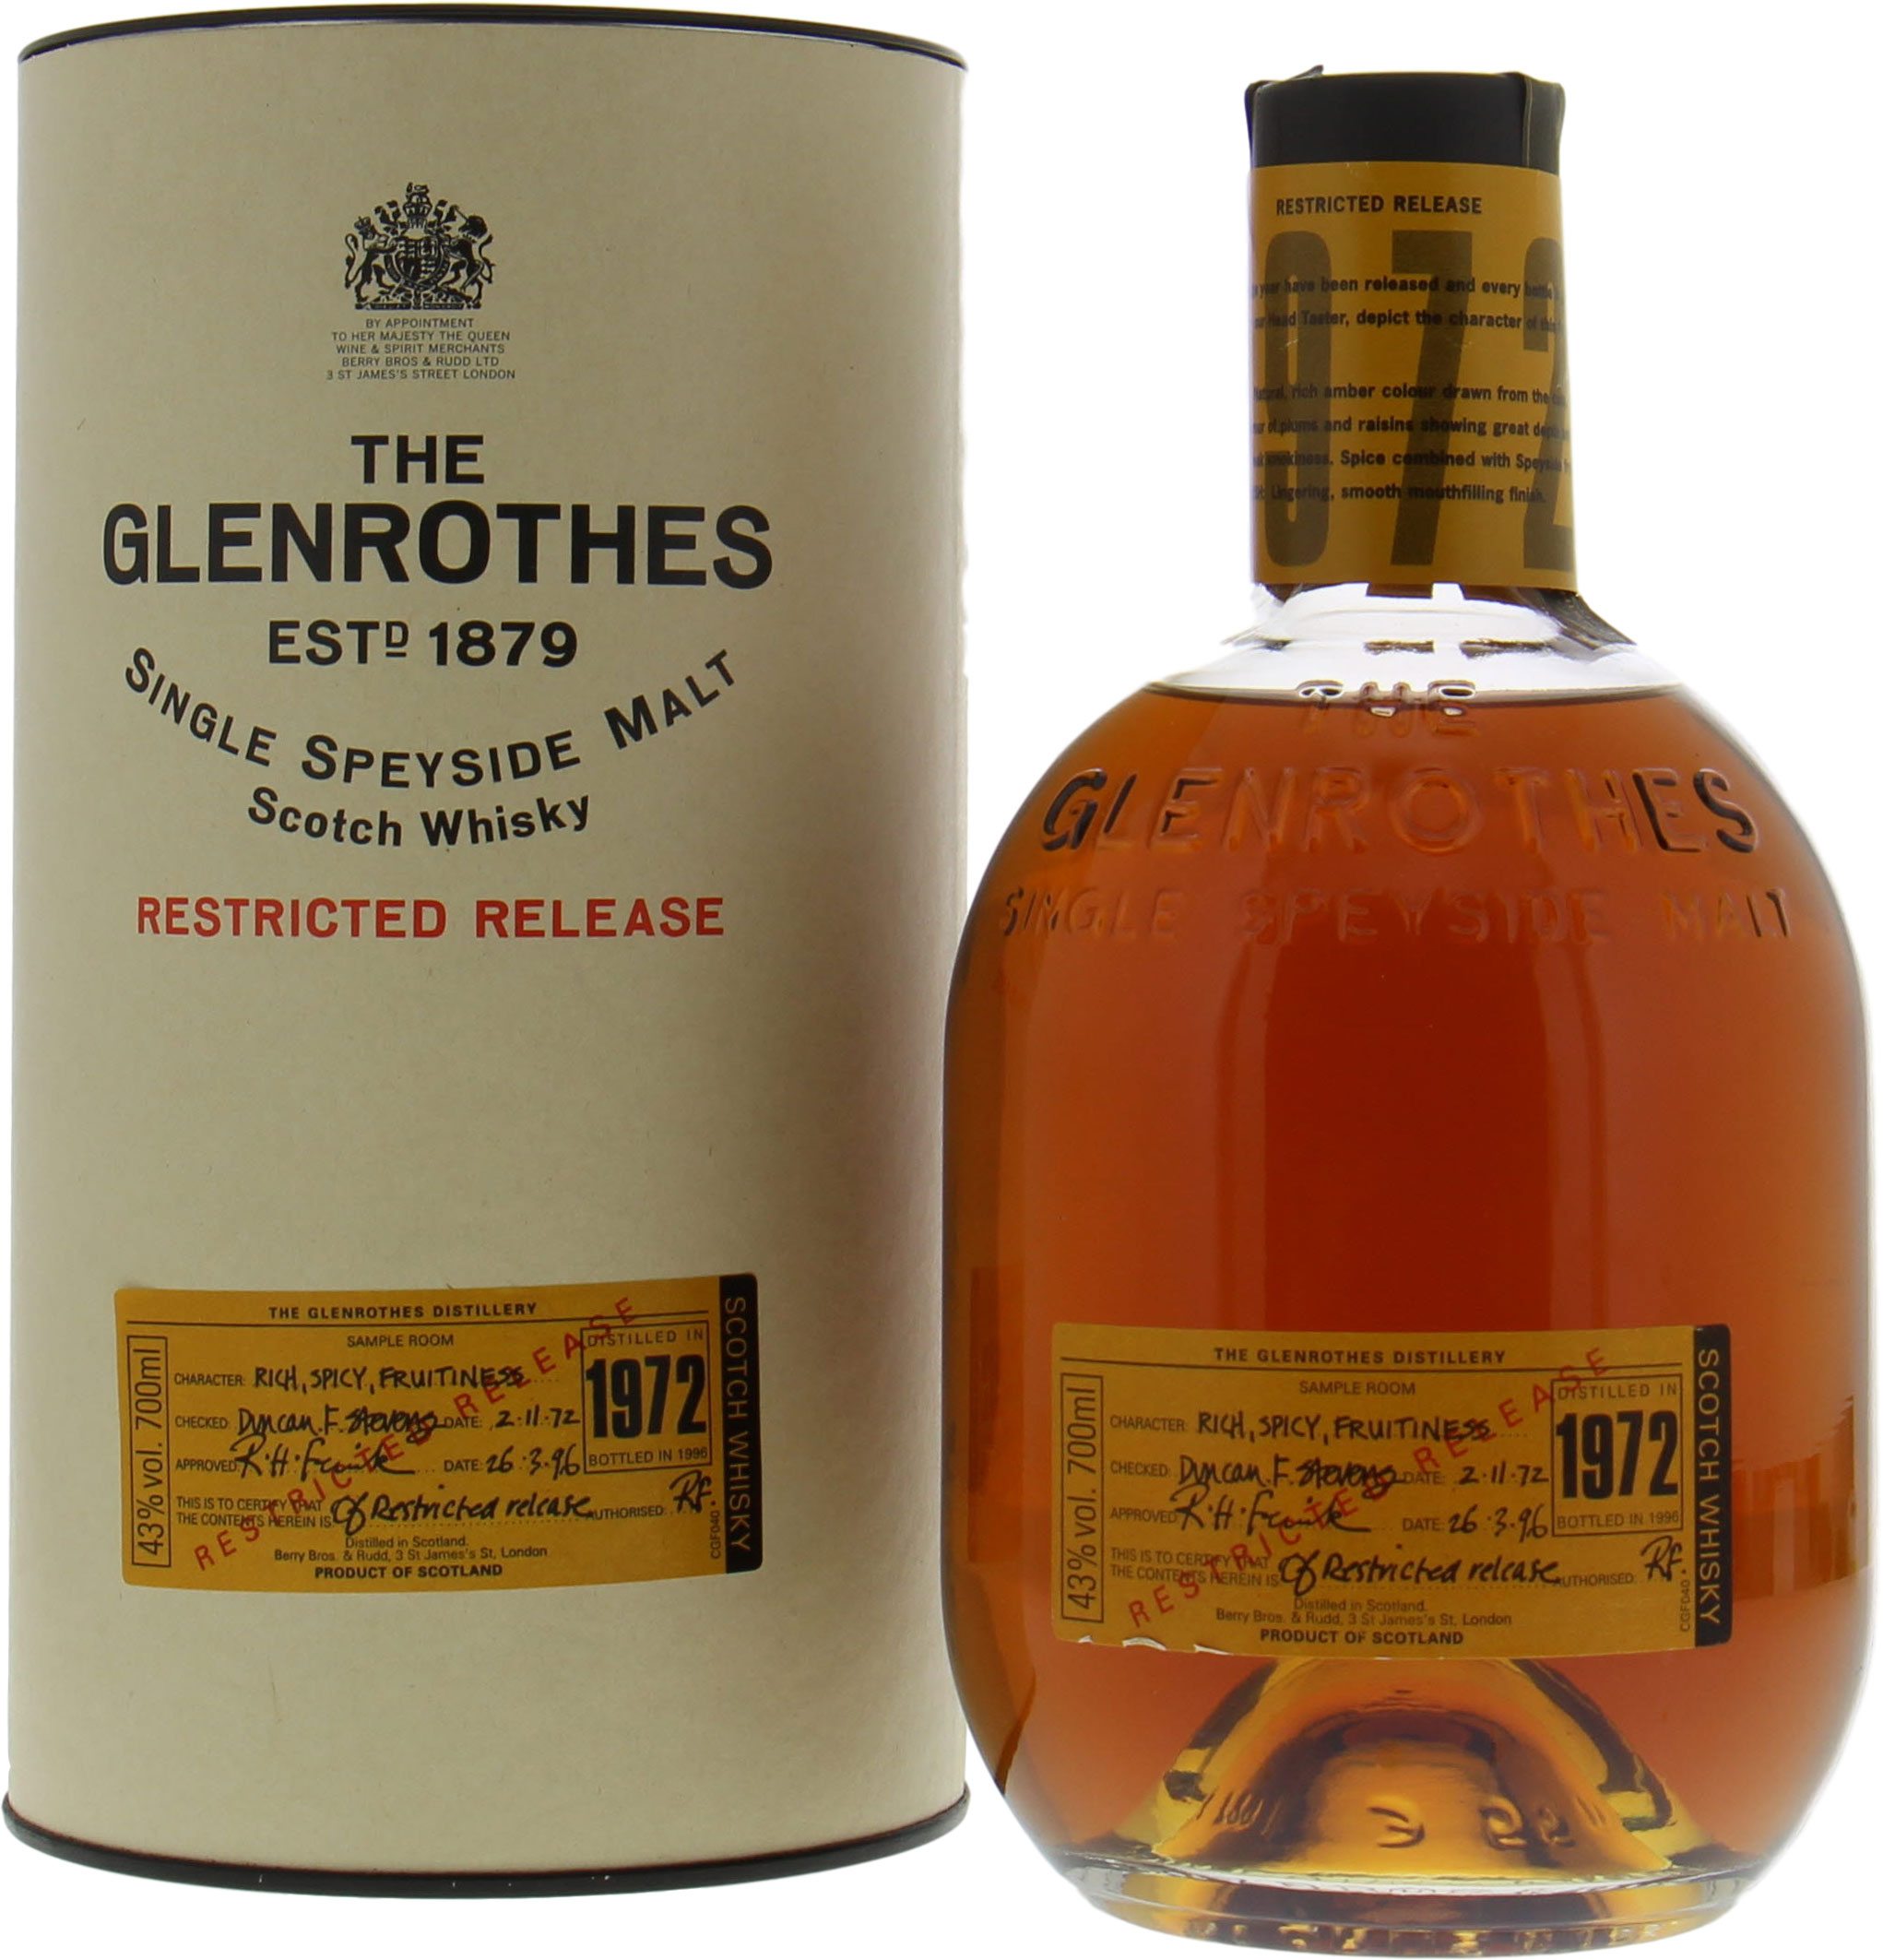 Glenrothes - 1972 Restricted Release Approved 26.03.1996 43% 1972 In Original Container